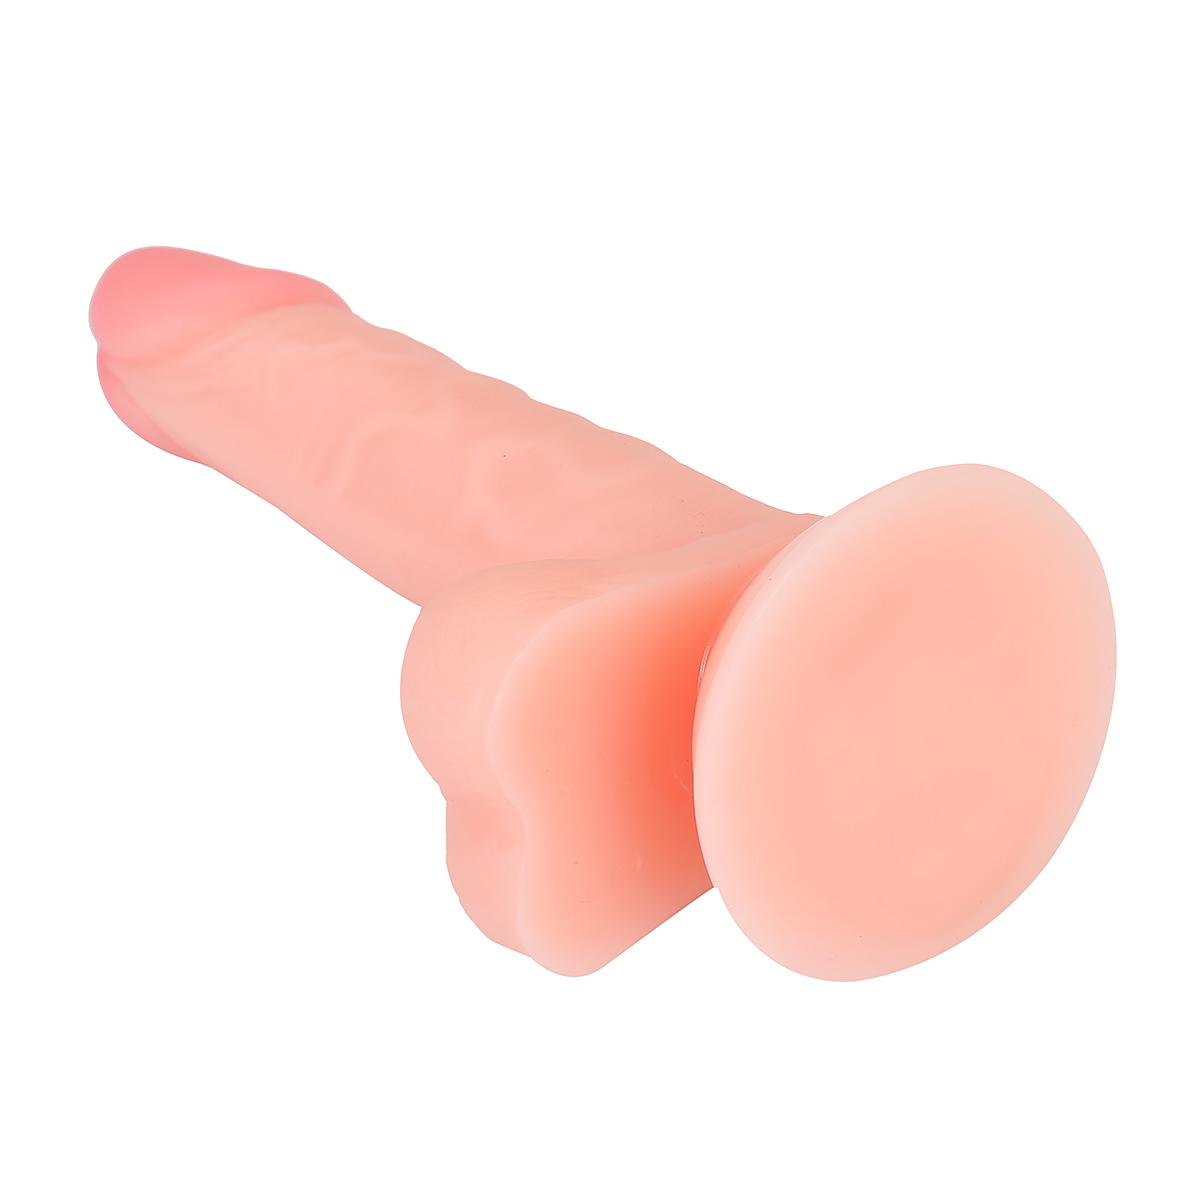 Large simulated penis with suction cup for adult sexual products, anal plug for female masturbator dildo wl226